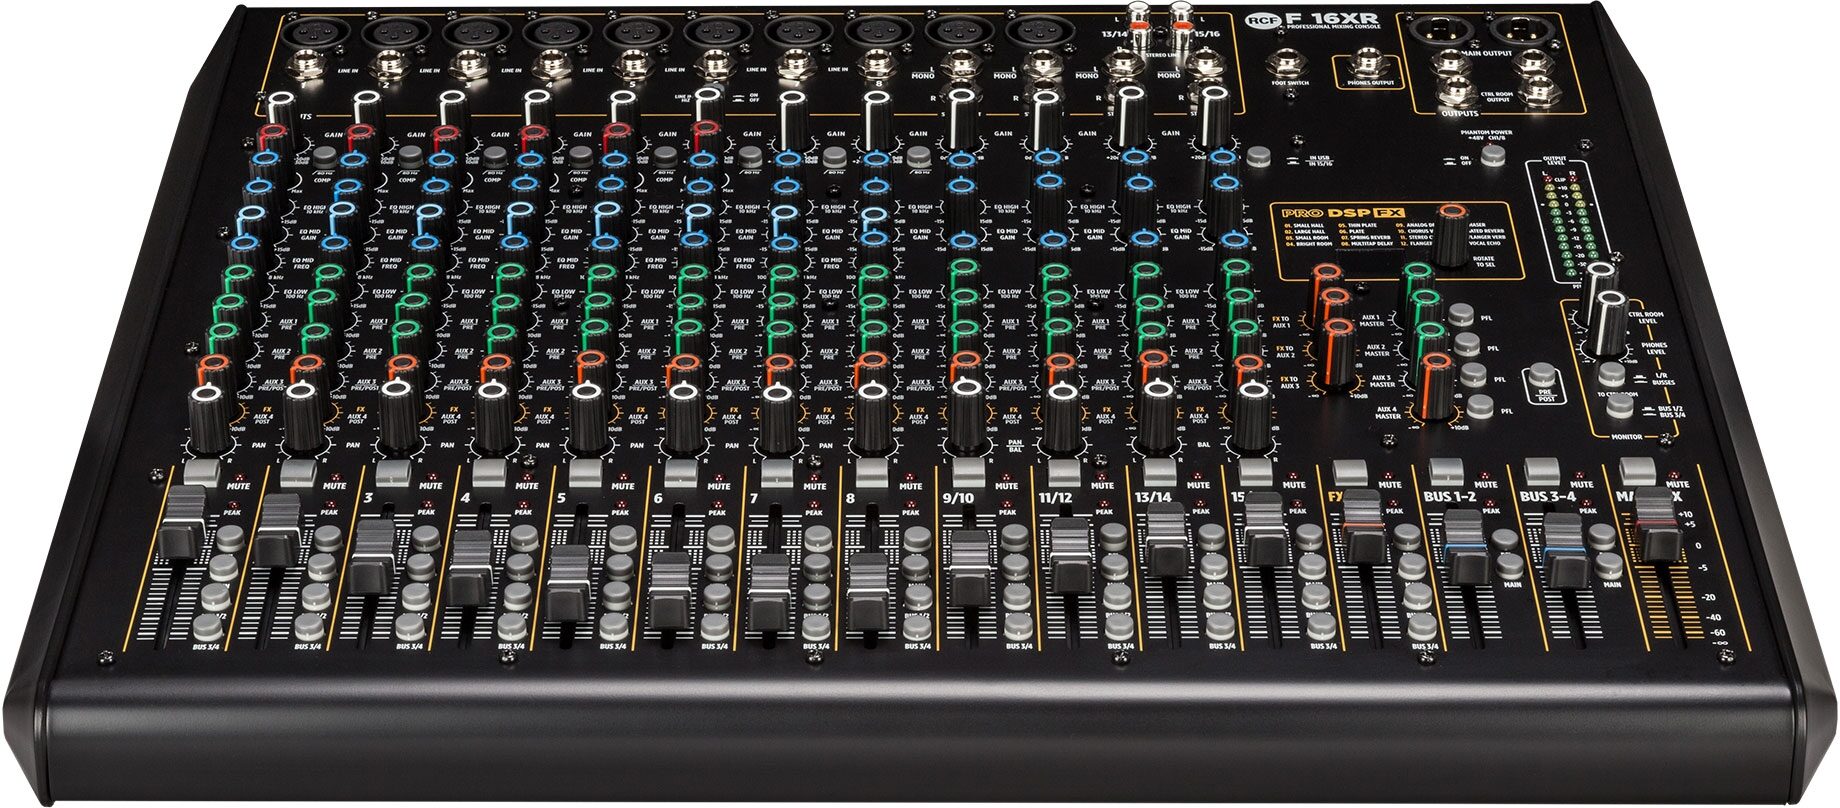 RCF F 16XR USB Mixer with Effects, 16-Channel | zZounds